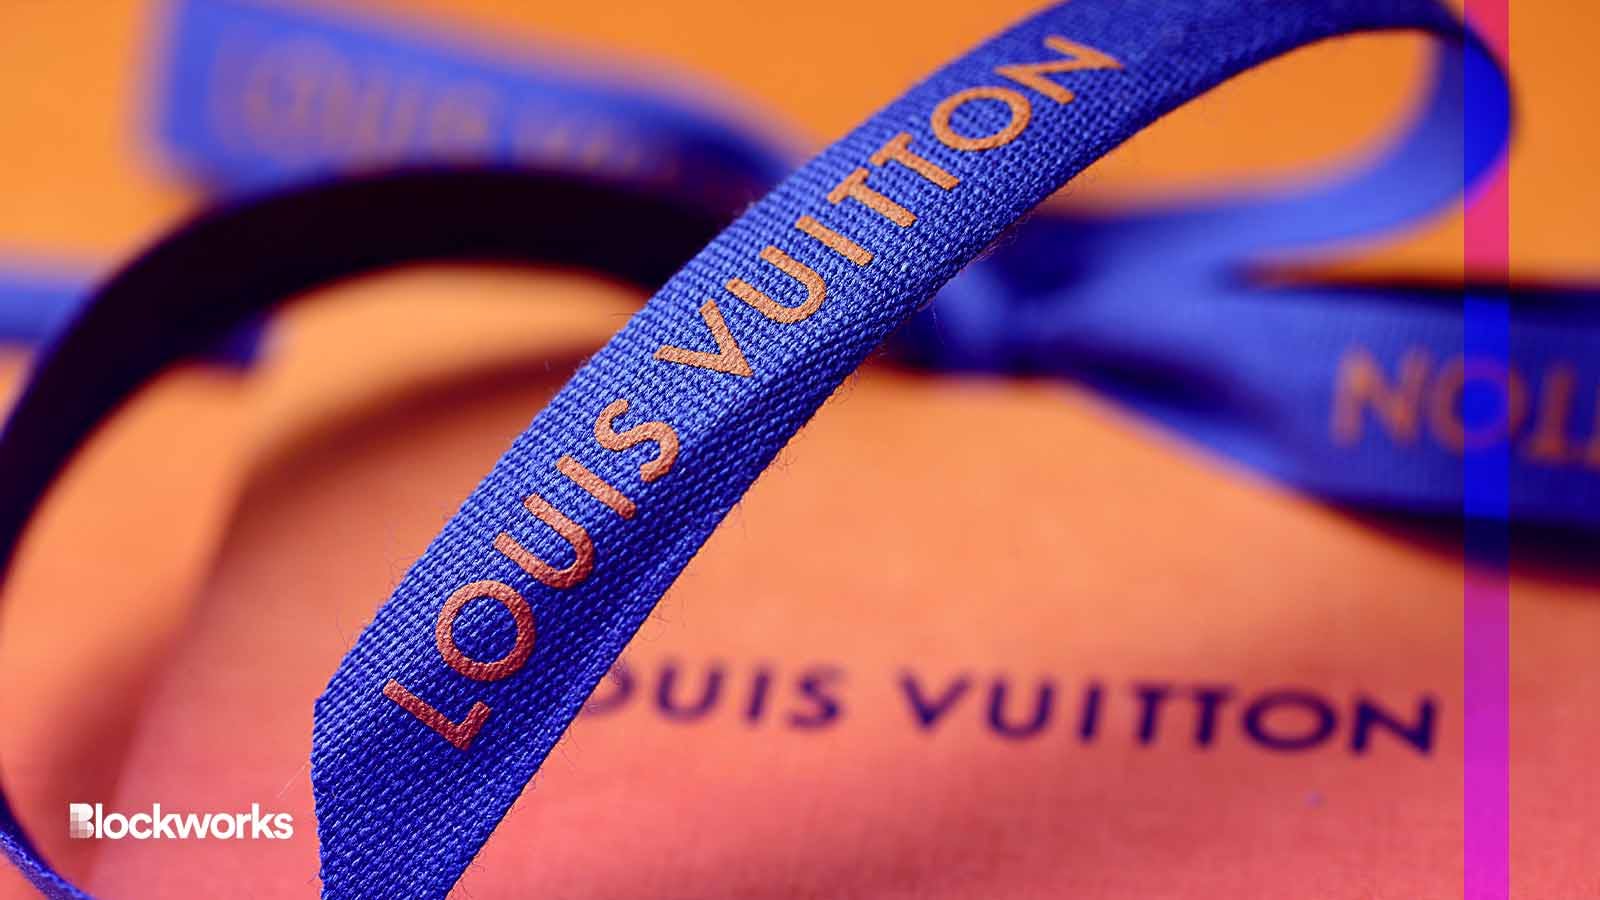 Louis Vuitton Launches First Ever Exclusive Online Product, Joins Twitter